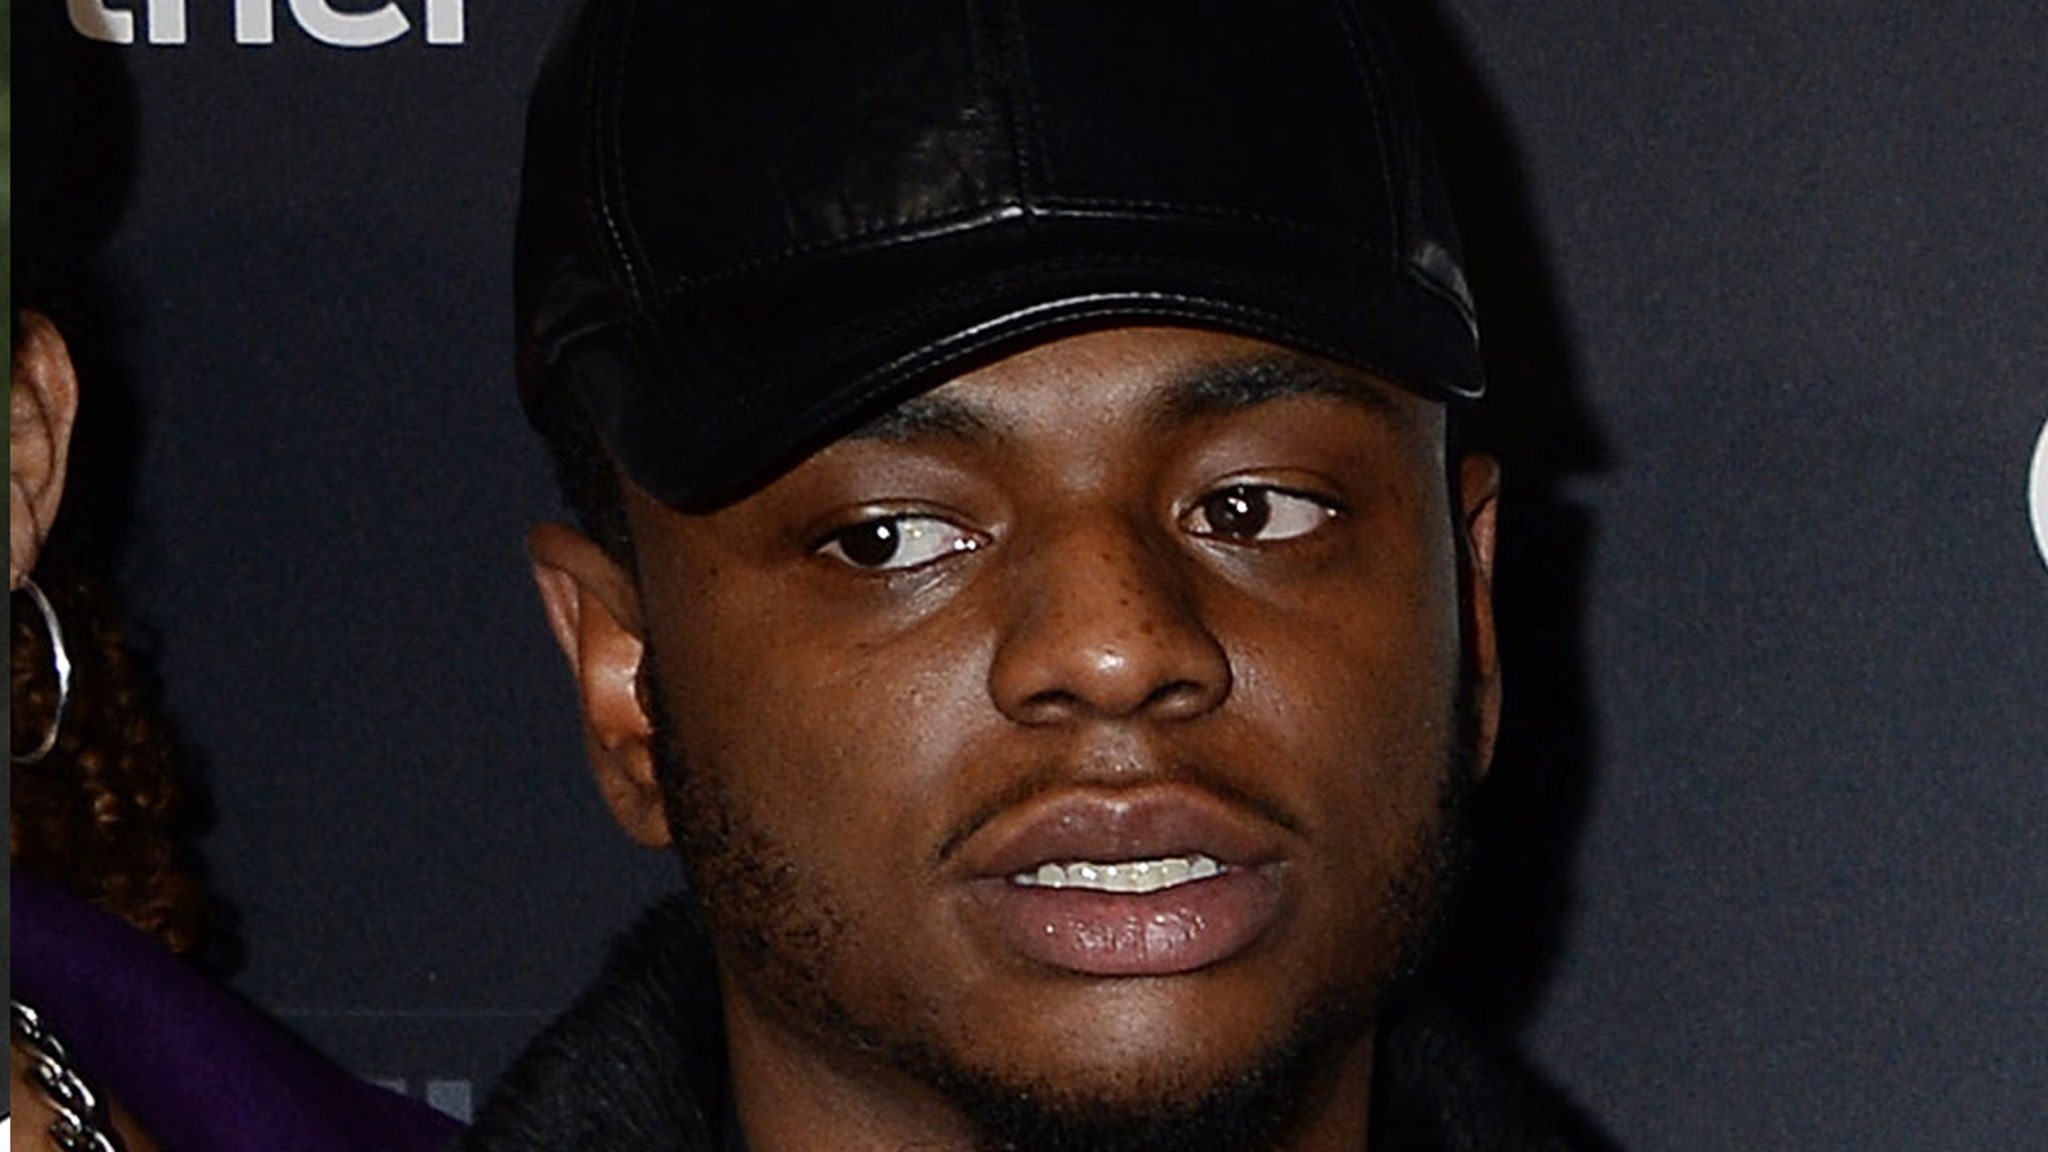 Bobby Brown Jr. died of a combination of alcohol, cocaine and fentanyl